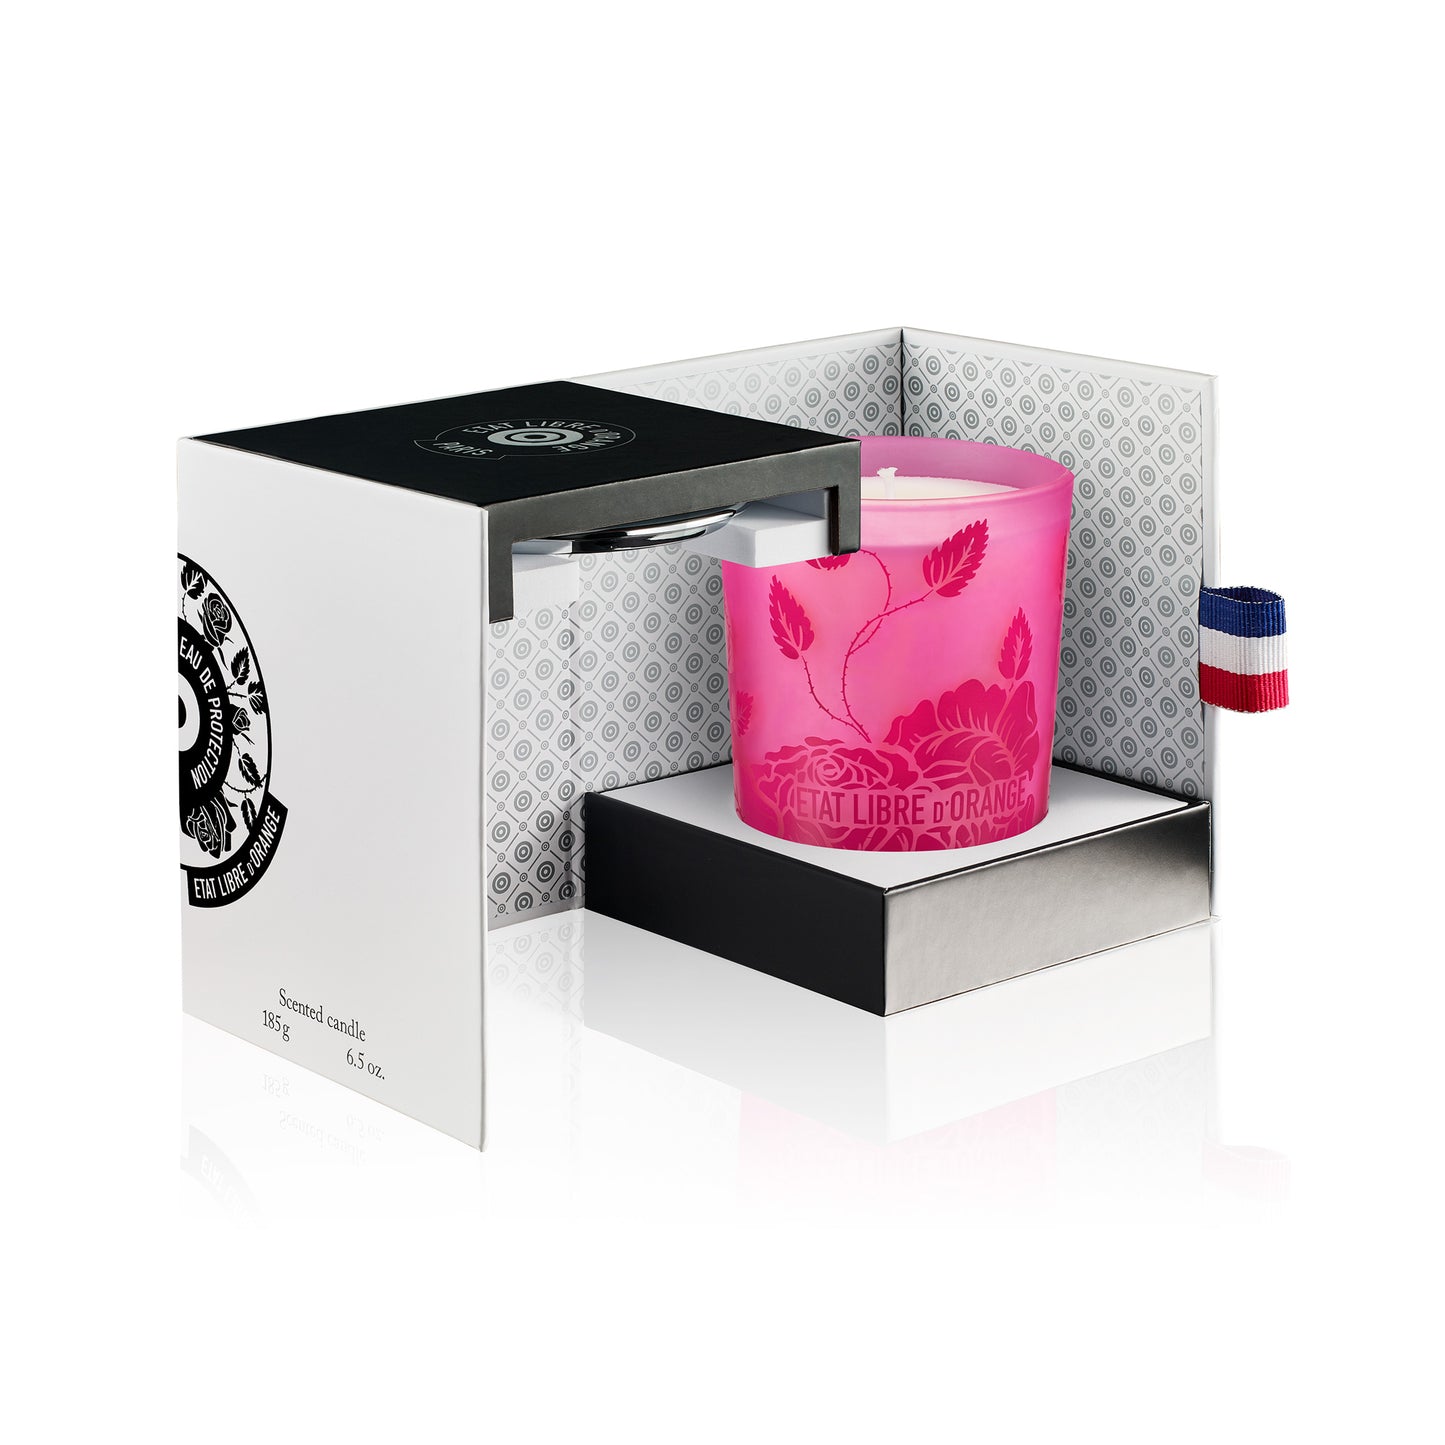 Eau de Protection - Scented candle - Opened box and candle